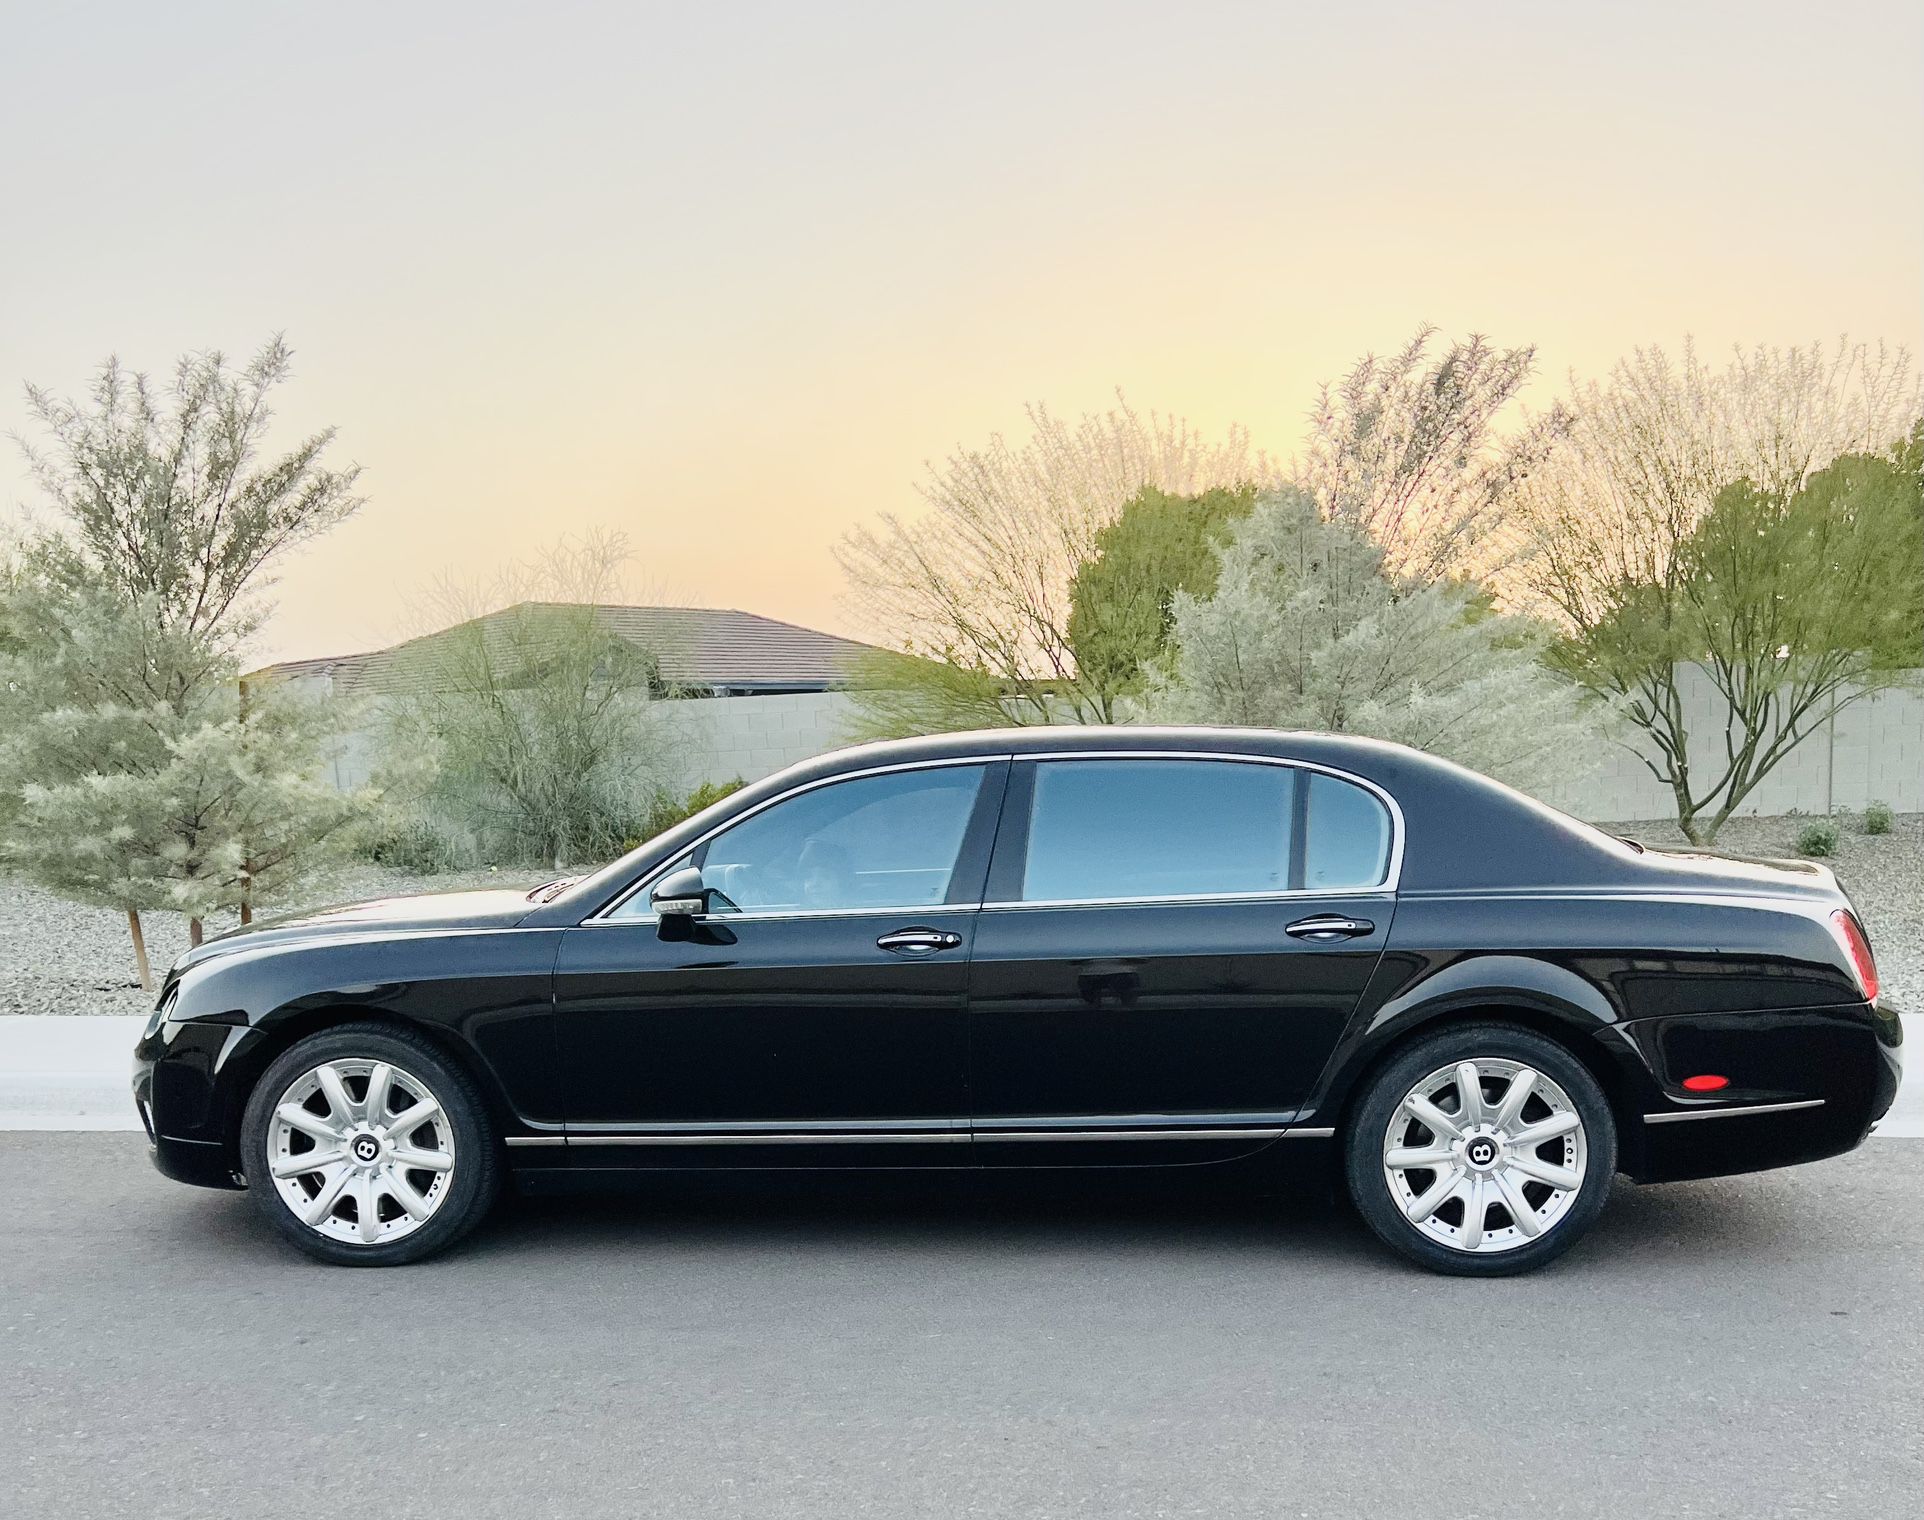 2008 Bentley Continental Flying Spur for Sale in Phoenix, AZ - OfferUp